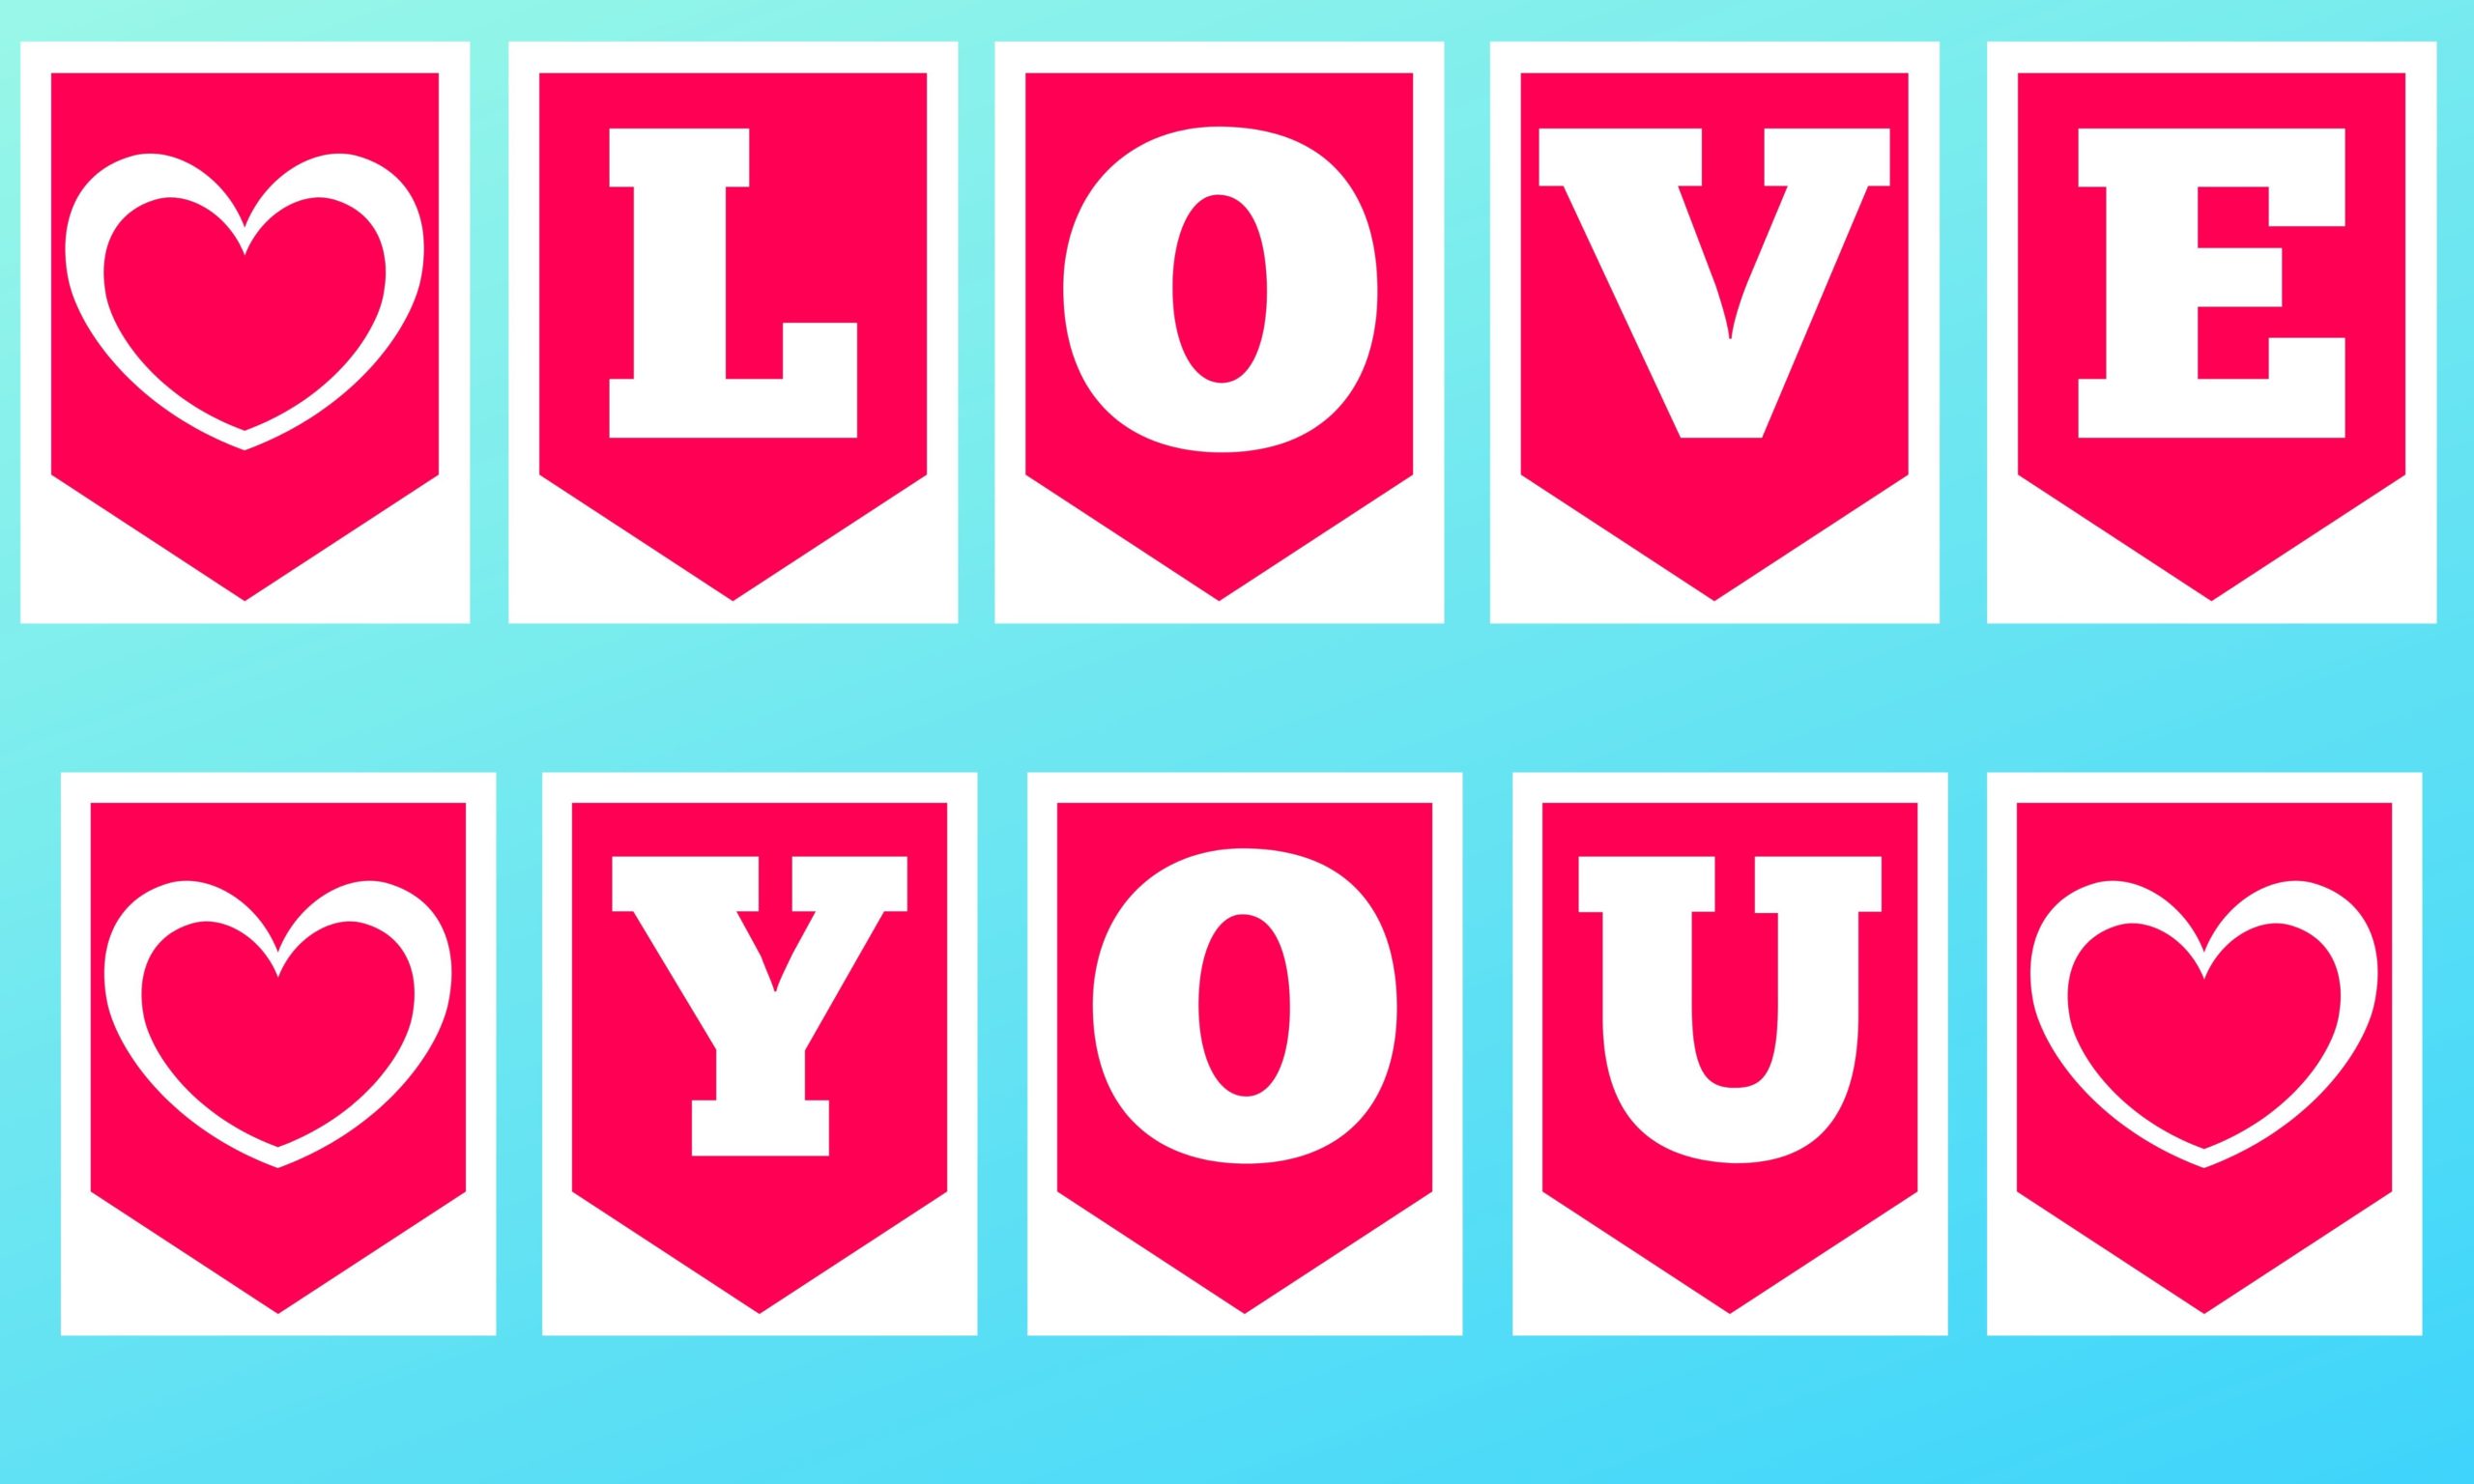 Hearts and Love You on 8.5 x 11 inch white pages to print and cut out for a Valentine banner